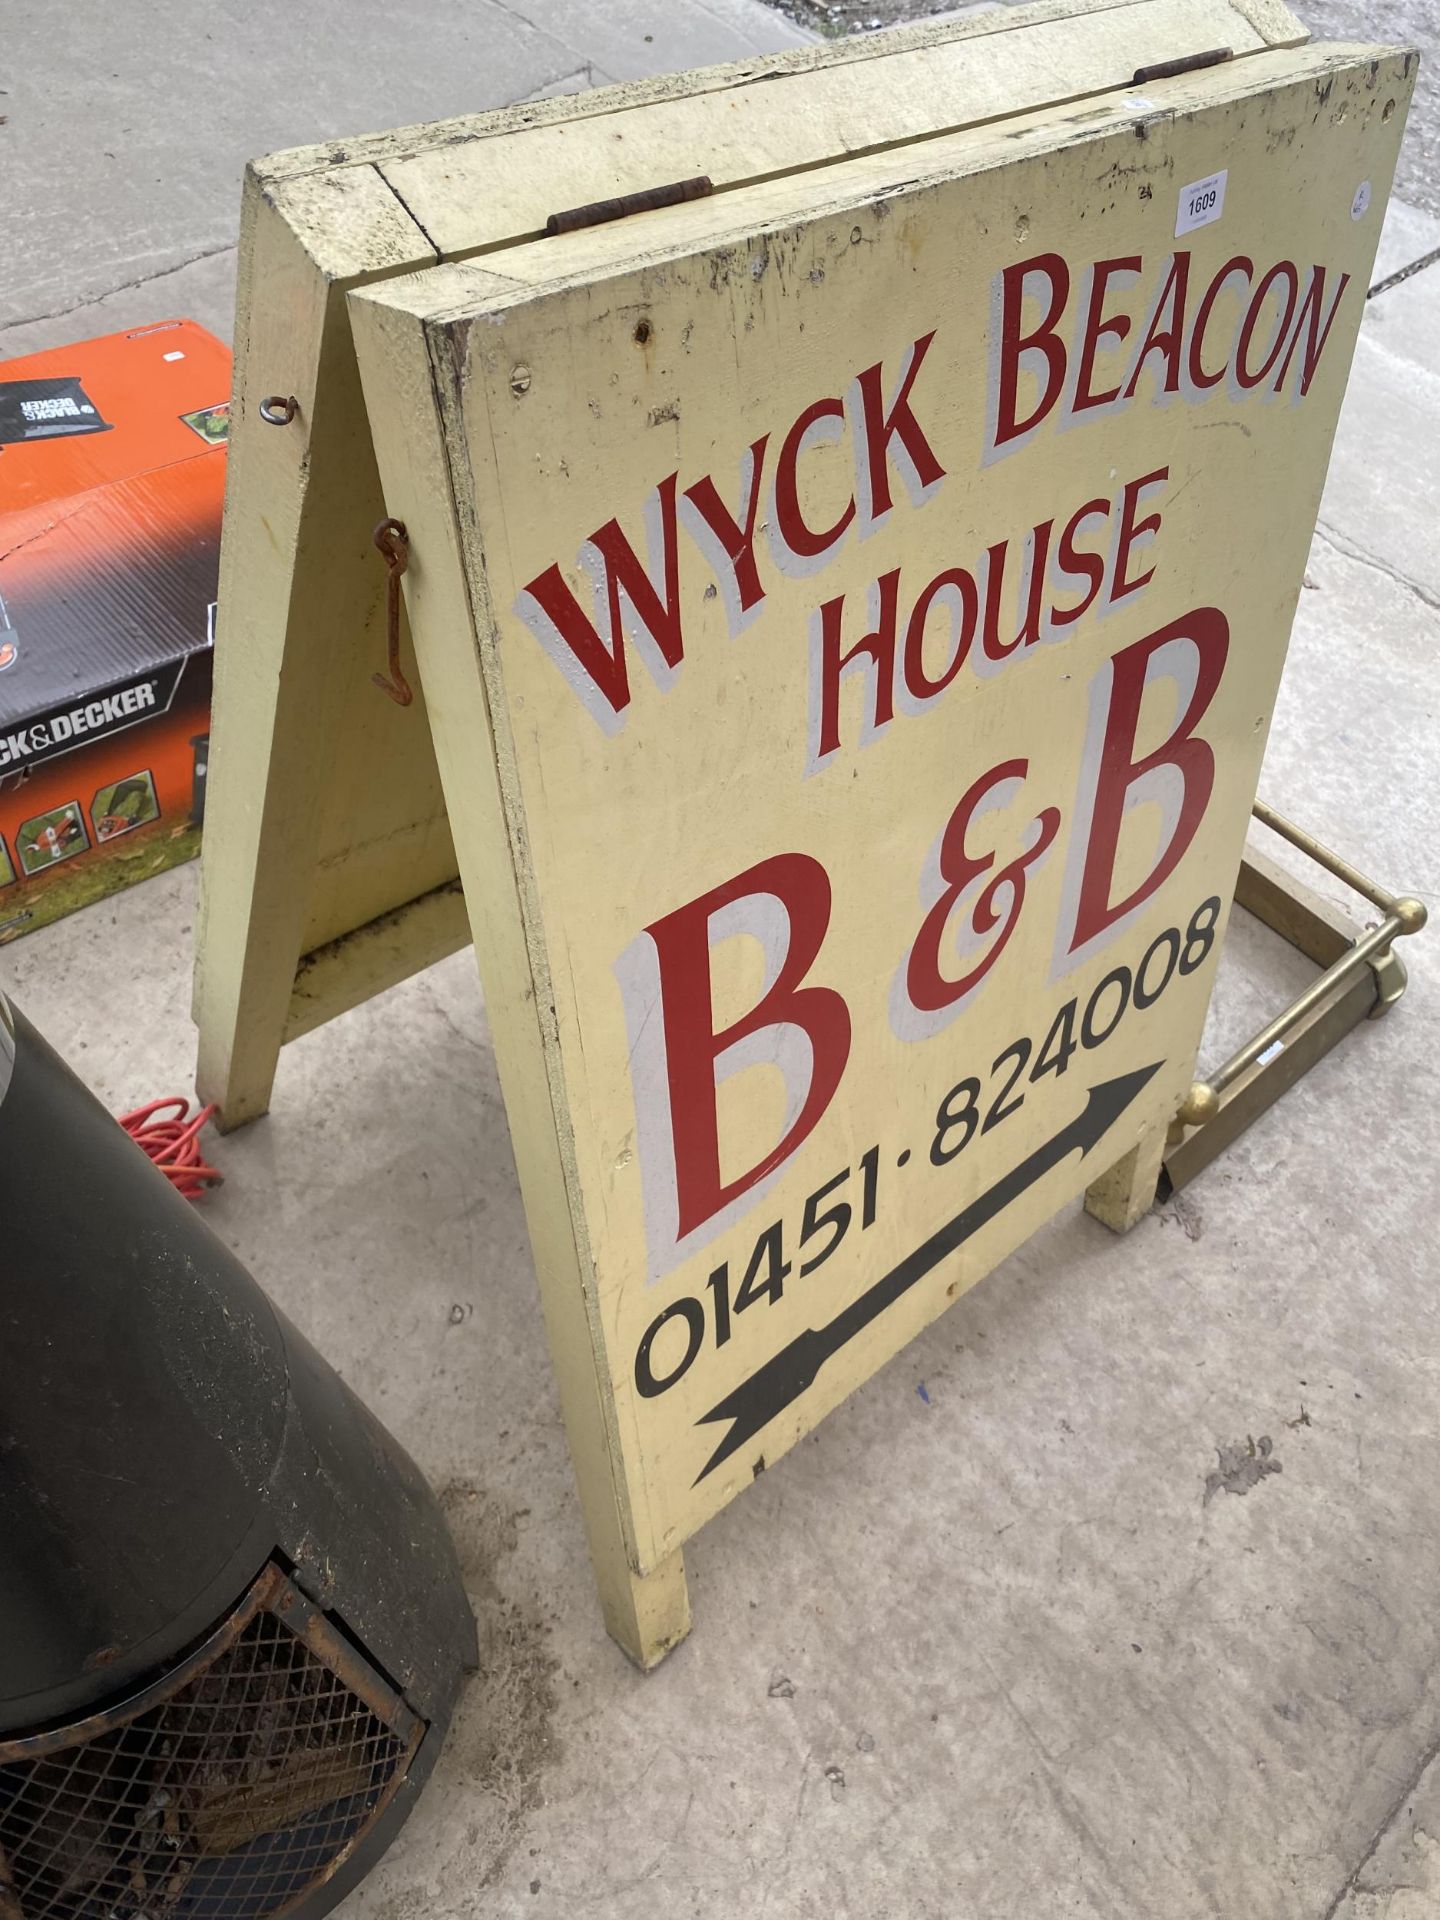 A WOODEN 'WYCK BEACON B&B' A FRAME SIGN - Image 2 of 2